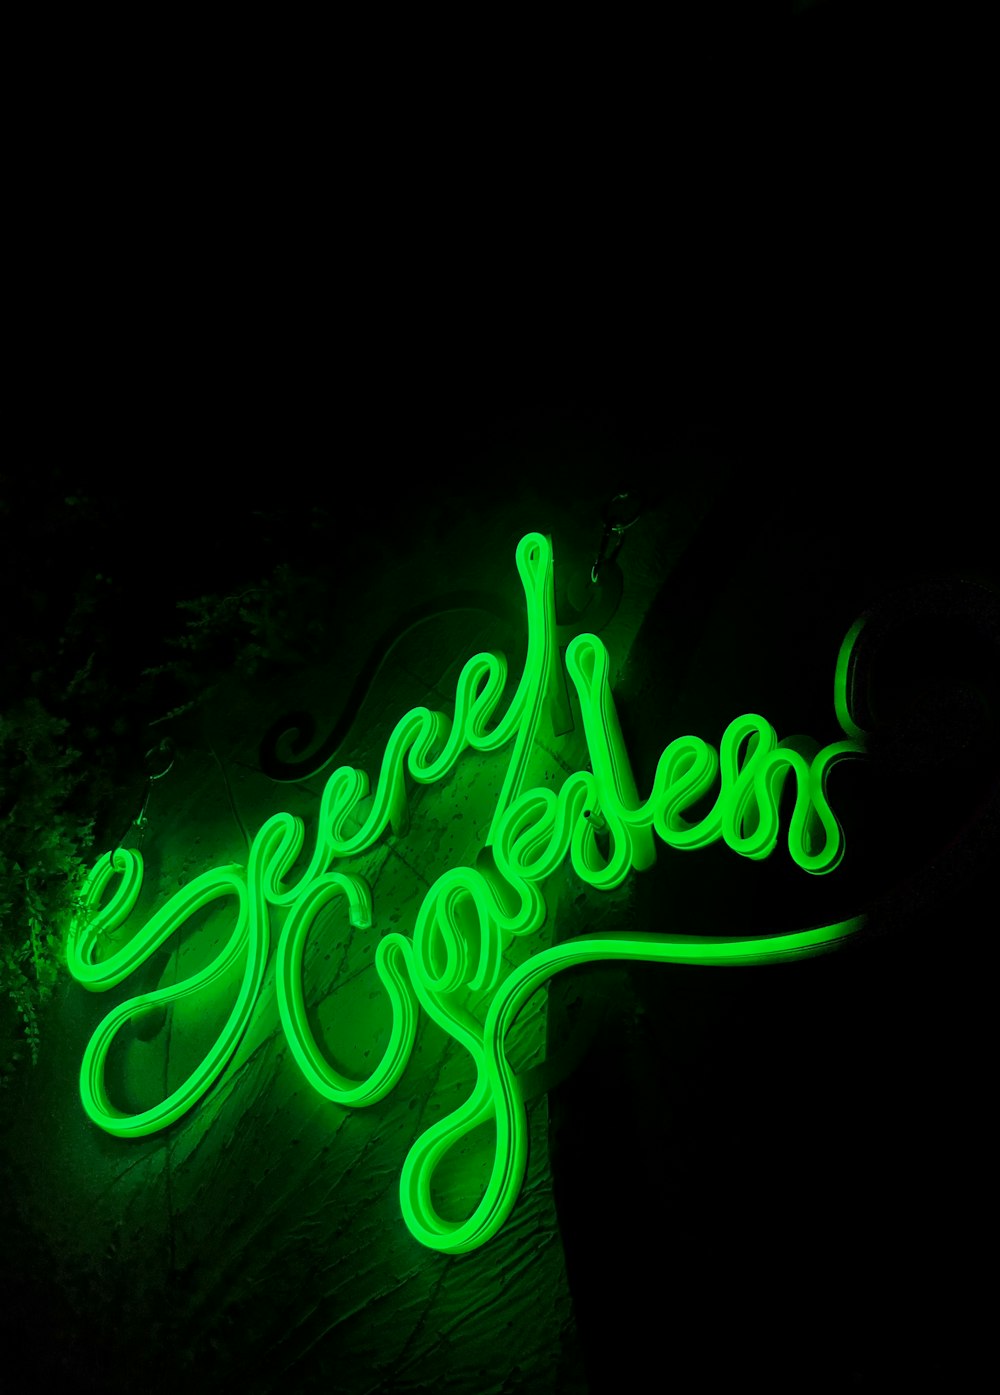 A neon green neon sign on a black wall photo – Free Neon Image on